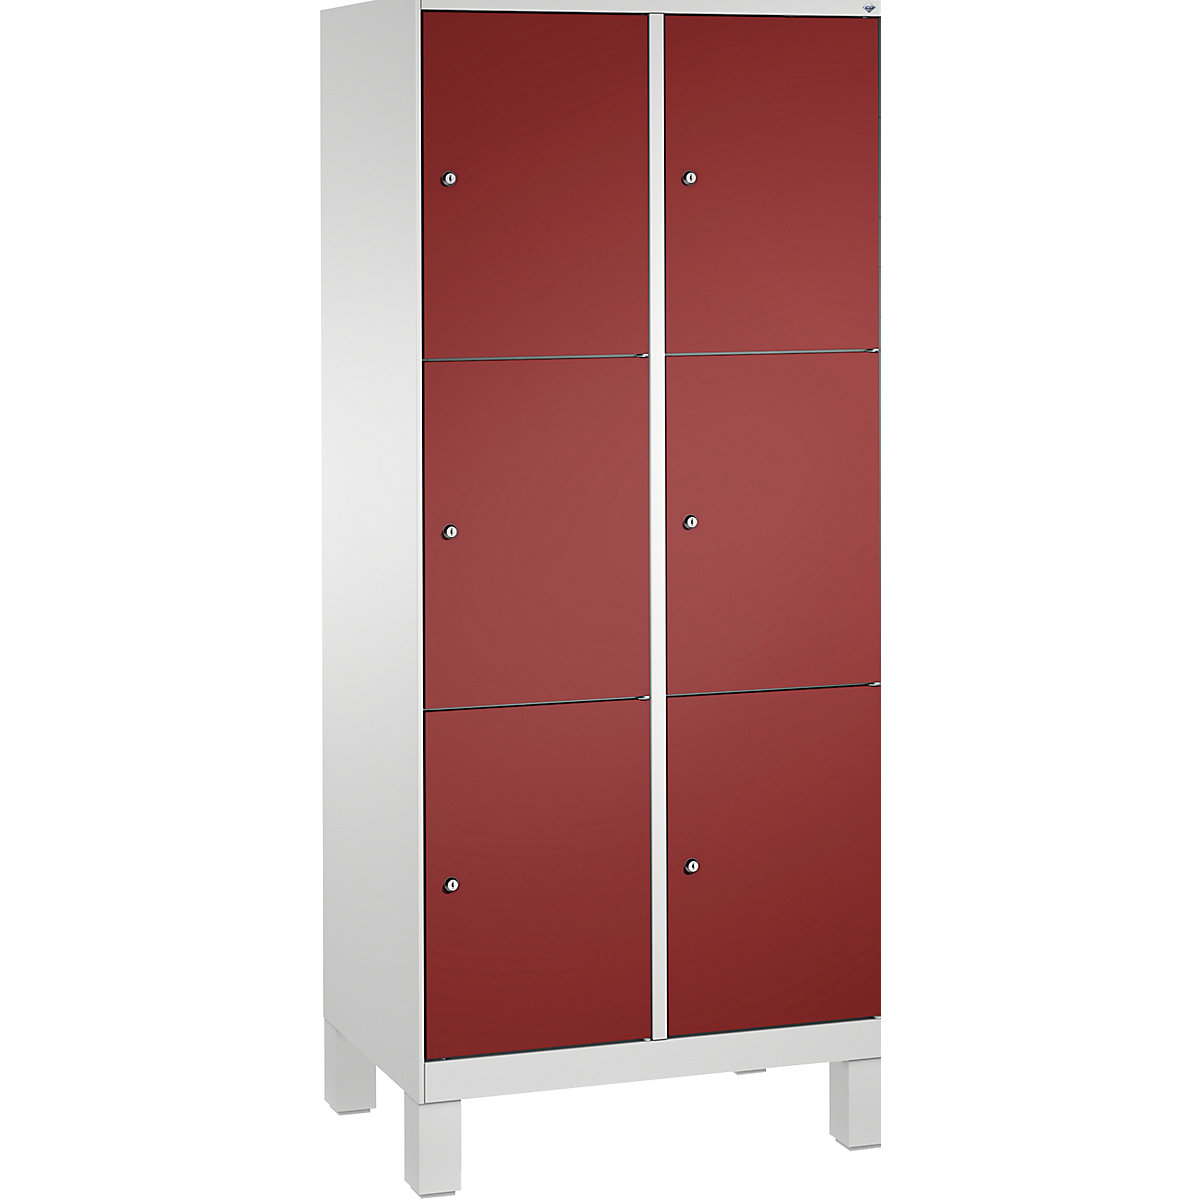 EVOLO locker unit, with feet – C+P, 2 compartments, 3 shelf compartments each, compartment width 400 mm, light grey / ruby red